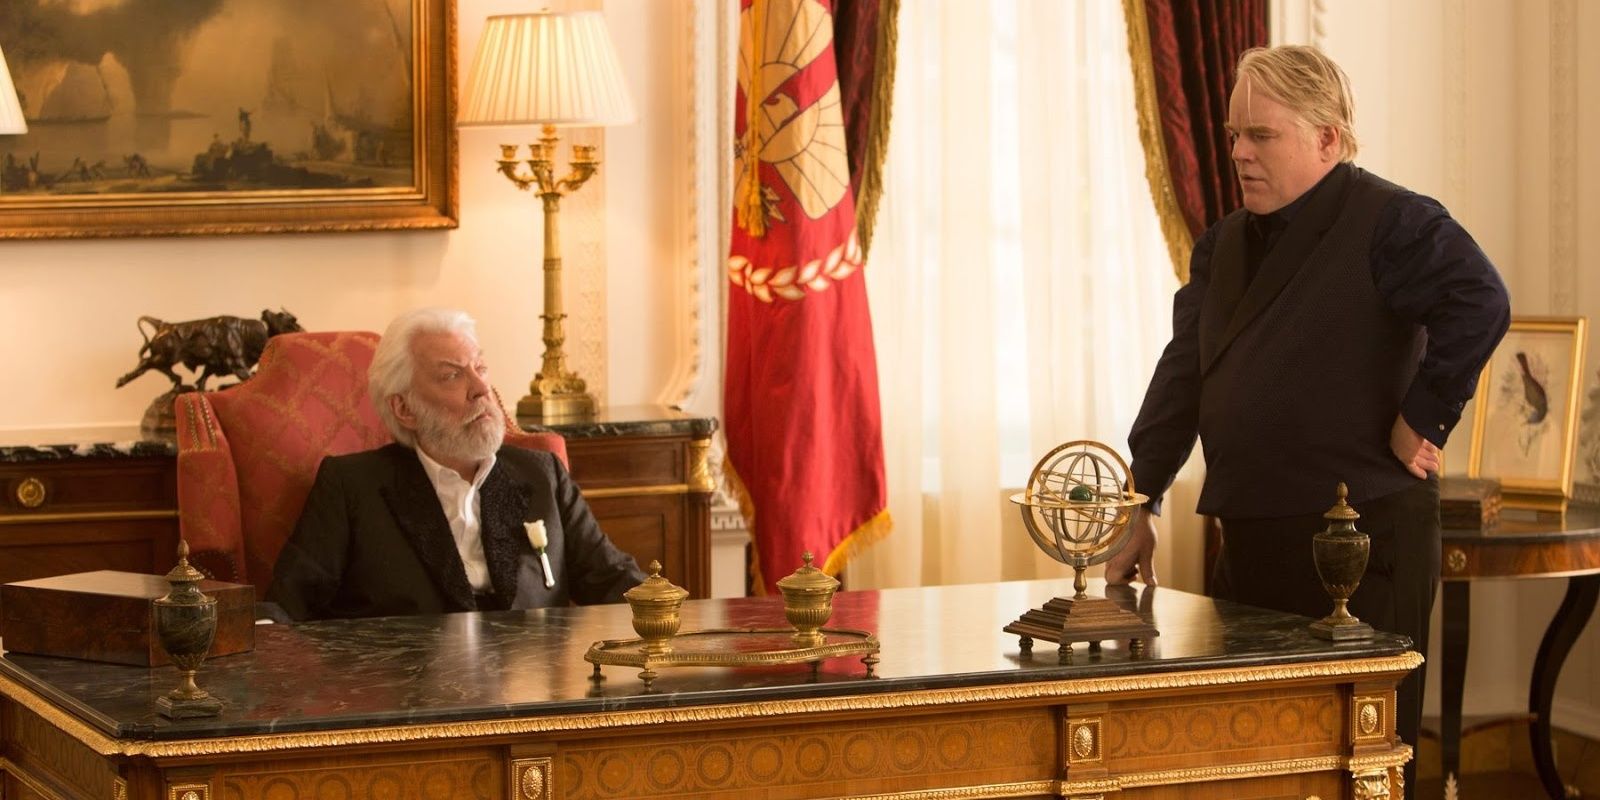 Plutarch Heavensbee visits President Snow's Office